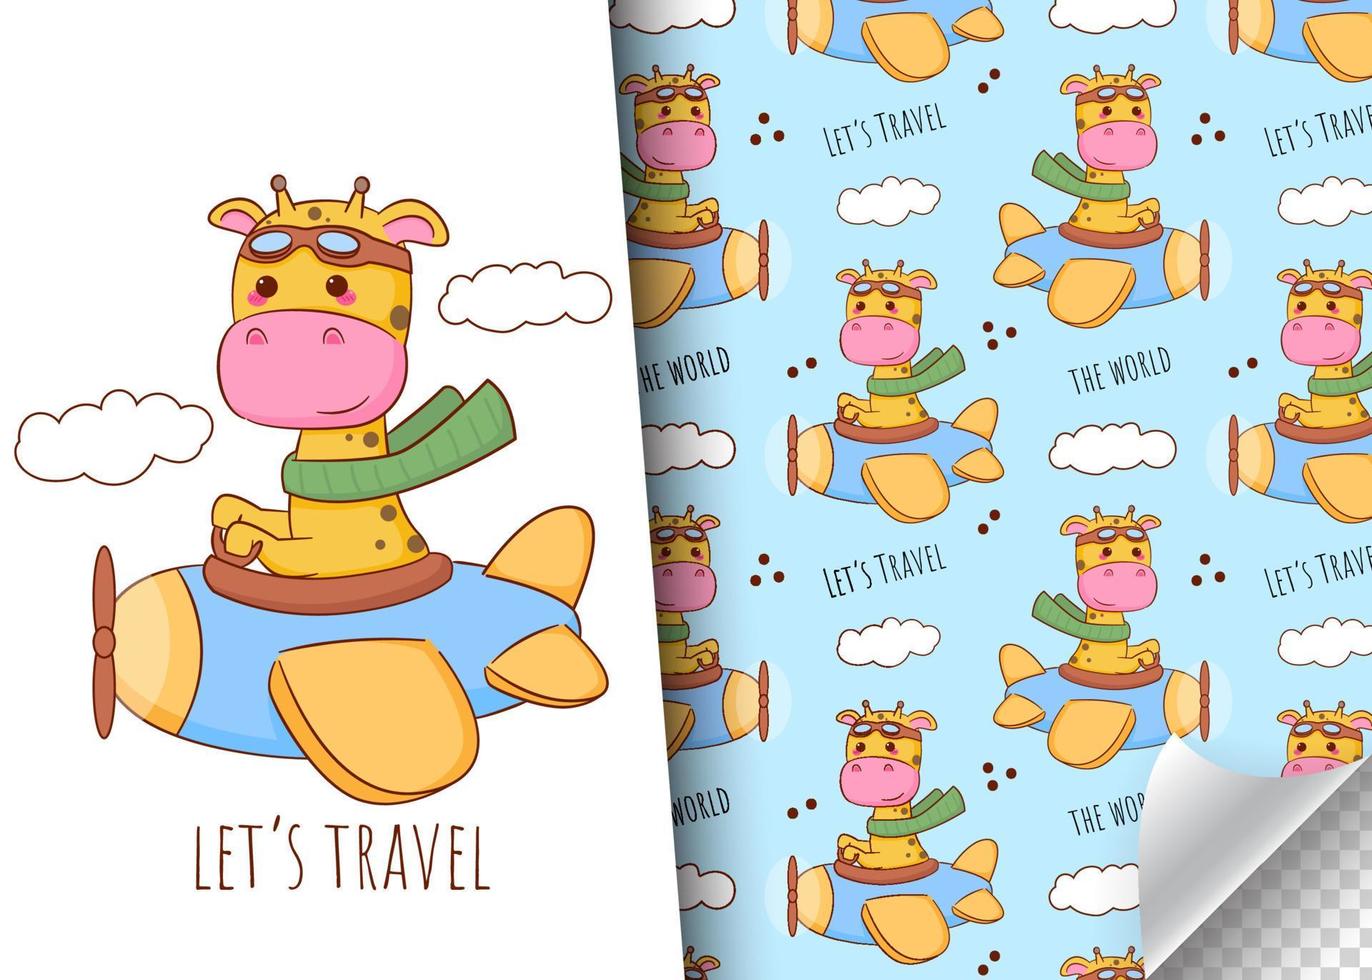 Cute cartoon giraffe character travel by plane. Kids card and seamless background pattern. Hand drawn design vector illustration.